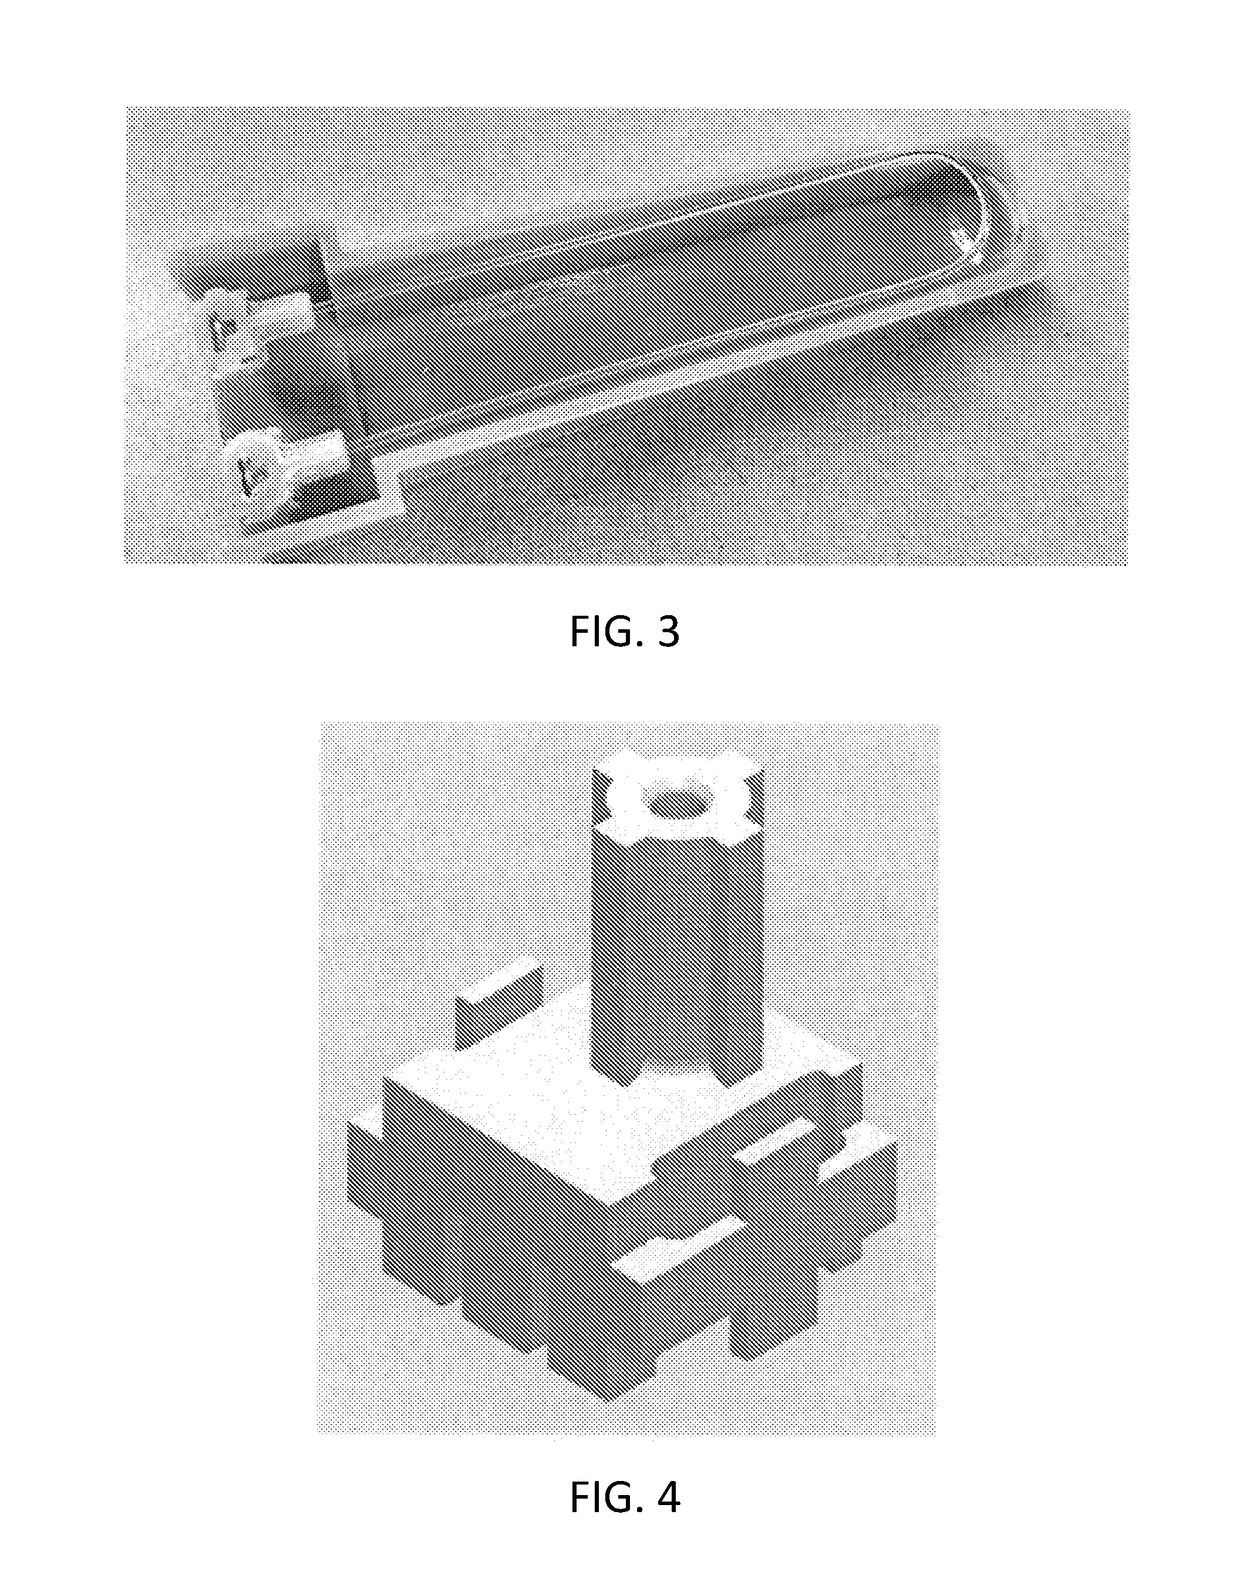 Waveguides for use in sensors or displays